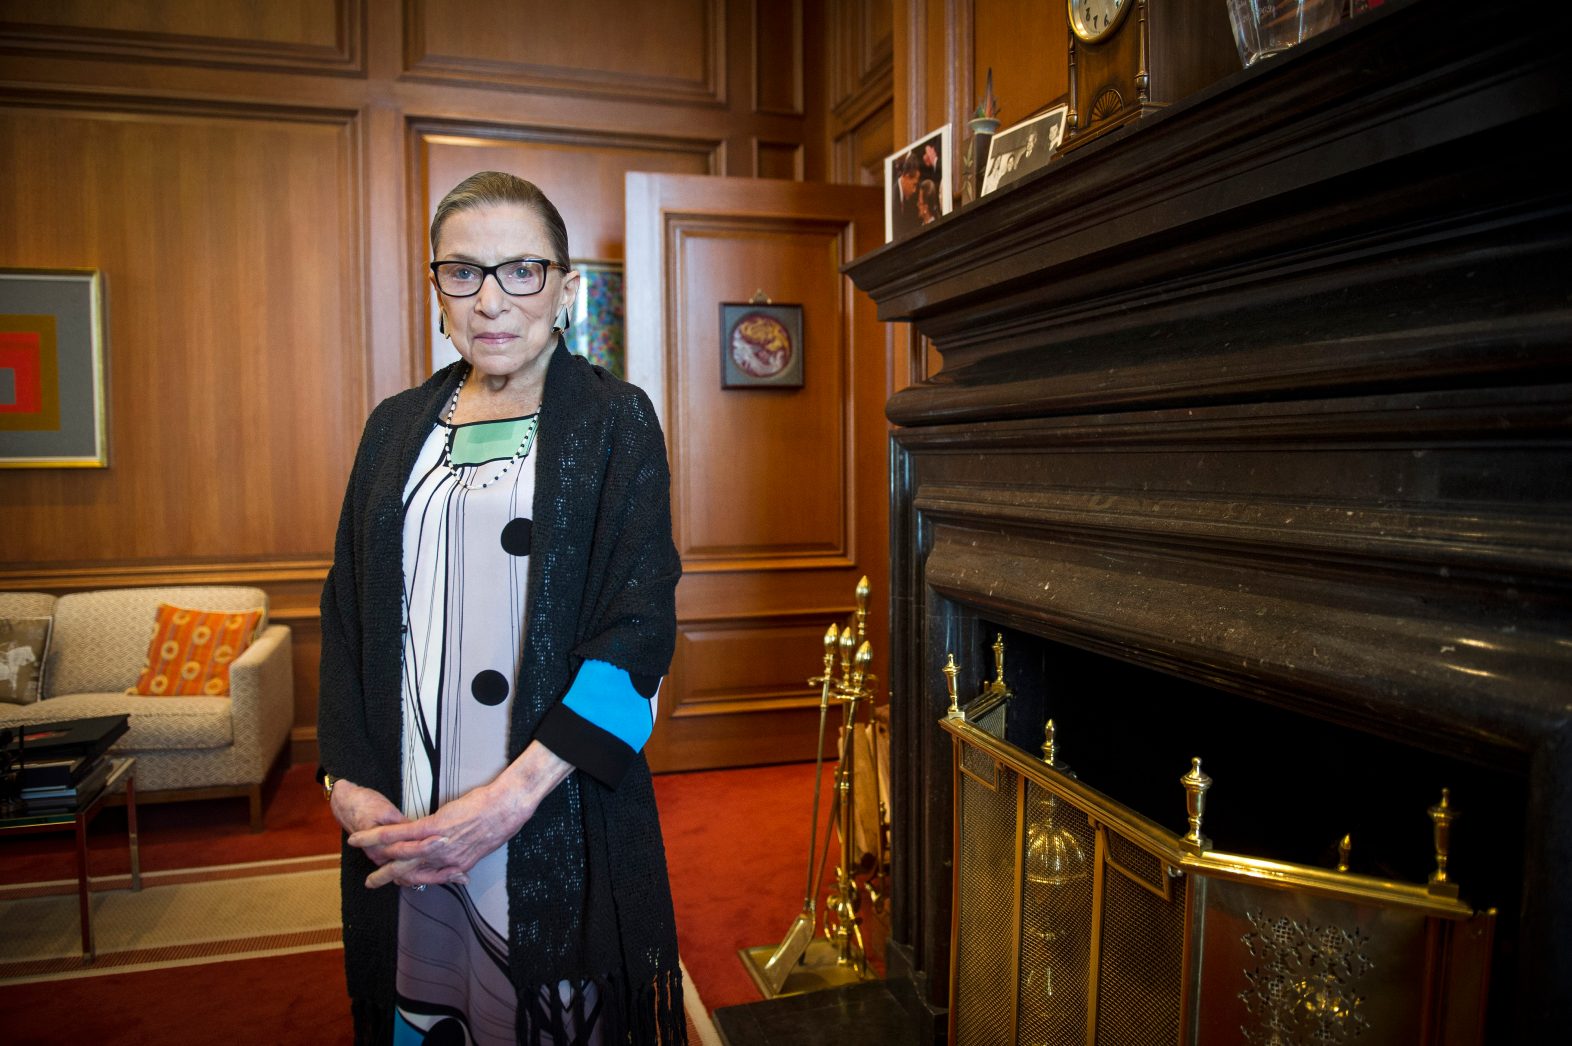 Democrats can honor RBG by getting out to vote this November: Ada Briceño